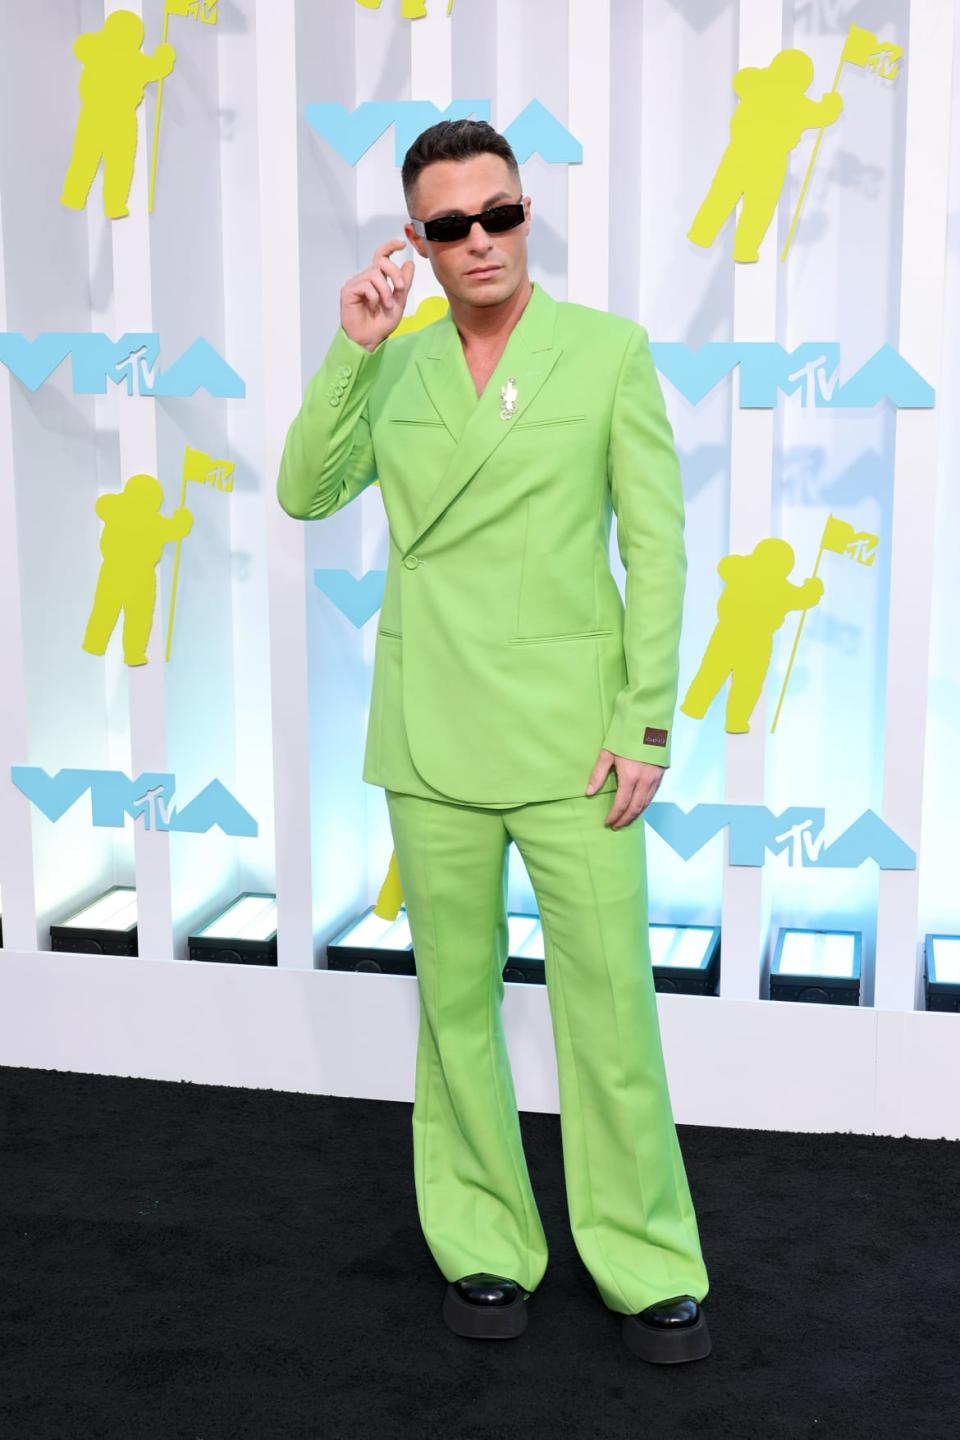 <div class="inline-image__title">Colton Haynes</div> <div class="inline-image__caption"><p>Colton Haynes has limes if you need them.</p></div> <div class="inline-image__credit">Cindy Ord/WireImage/Getty</div>